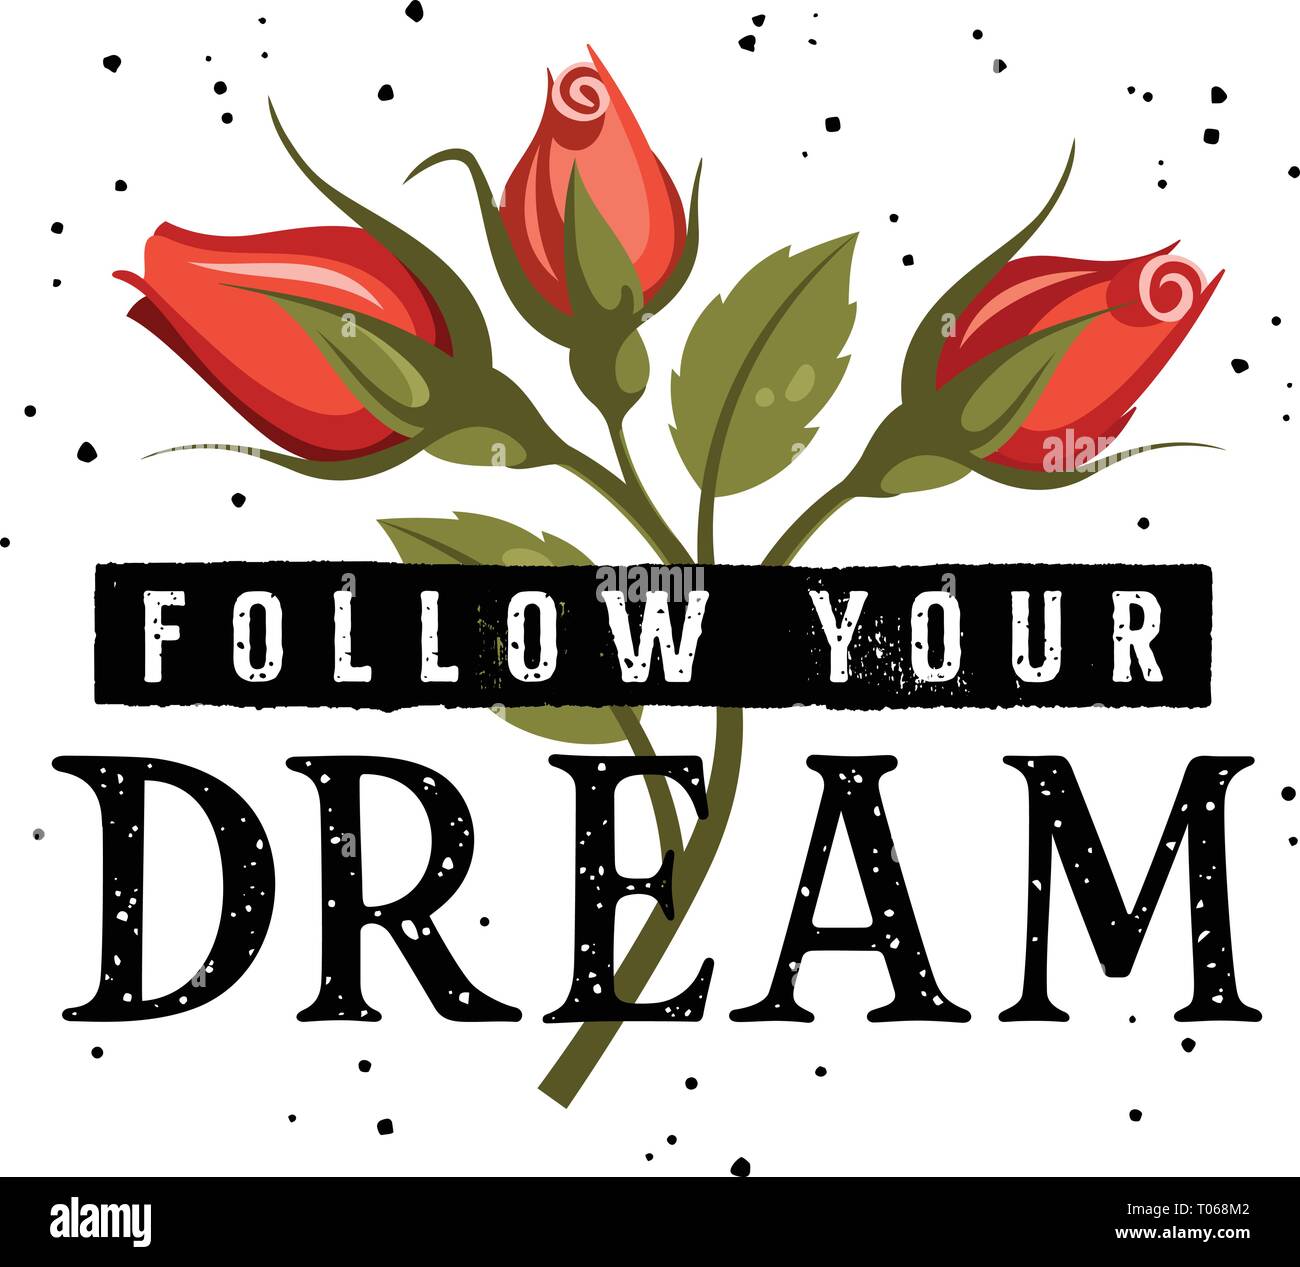 Follow Your Dream slogan typography for T-shirt Design. Female  Graphic Tee. Vector illustration with motivational quote and red roses on grunge backg Stock Vector